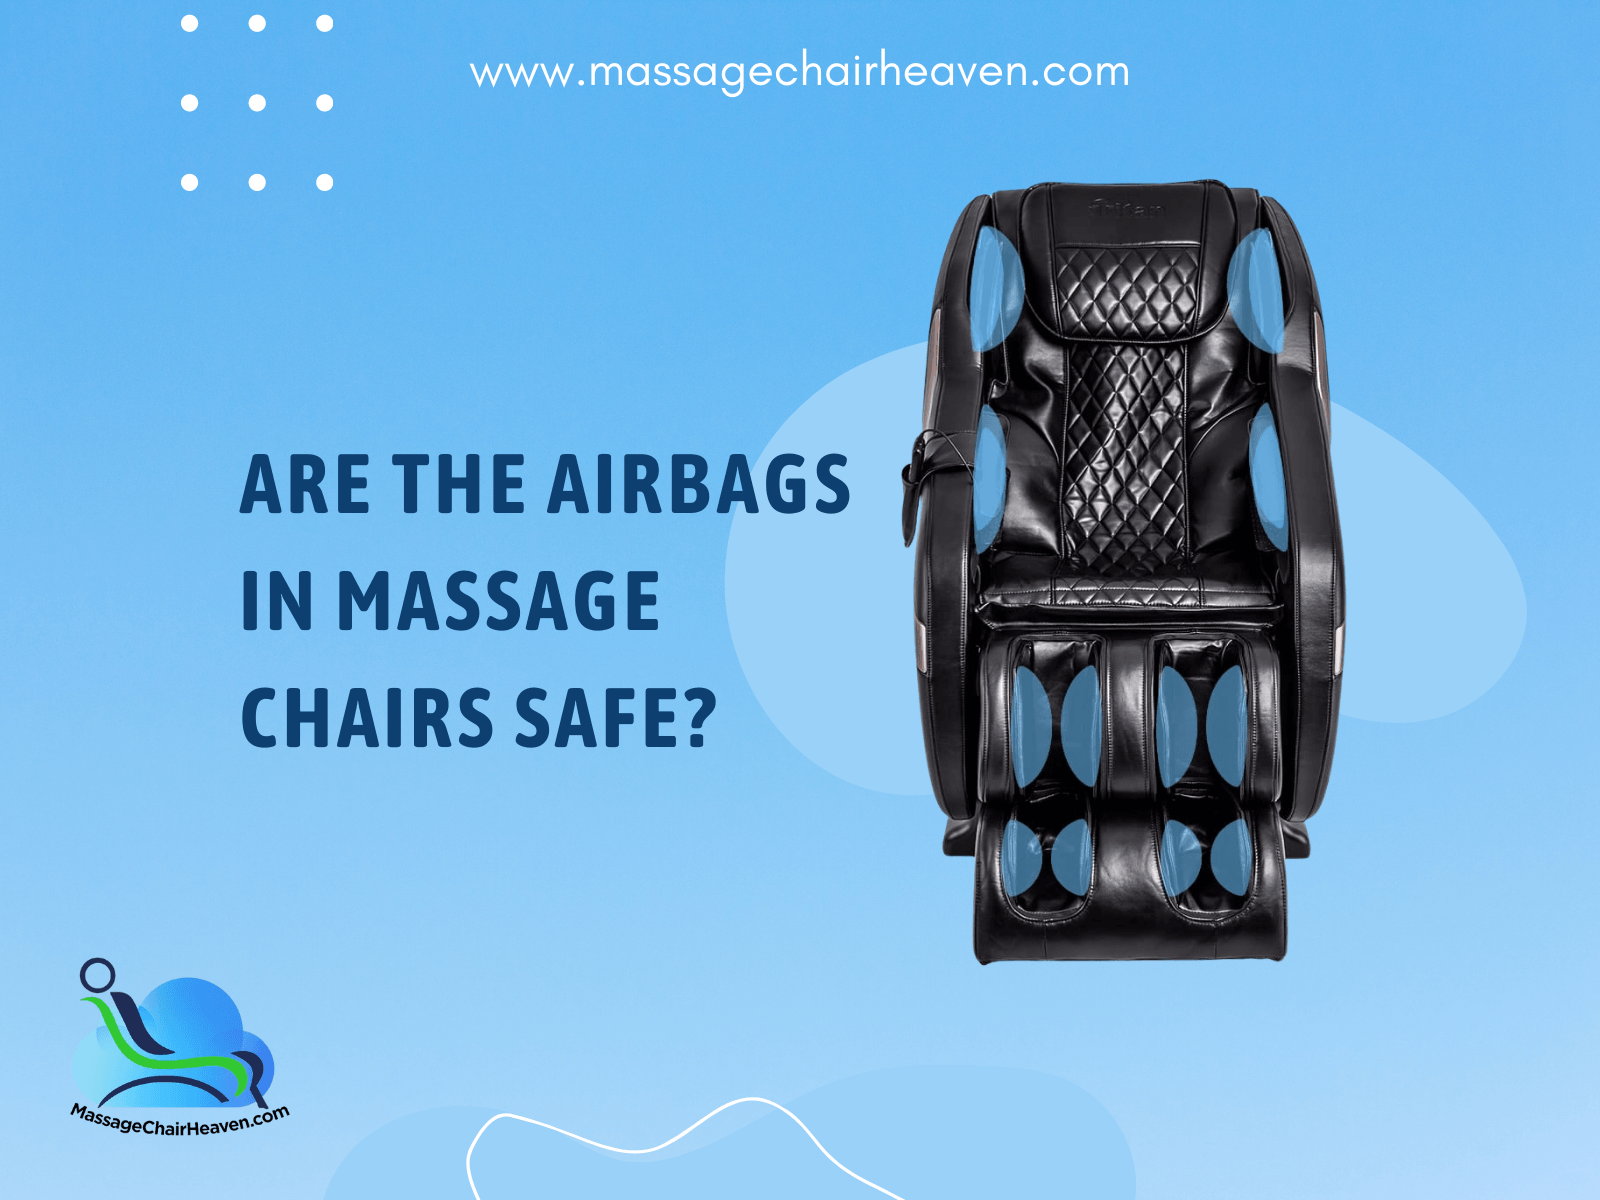 Are The Airbags in Massage Chairs Safe? - Massage Chair Heaven